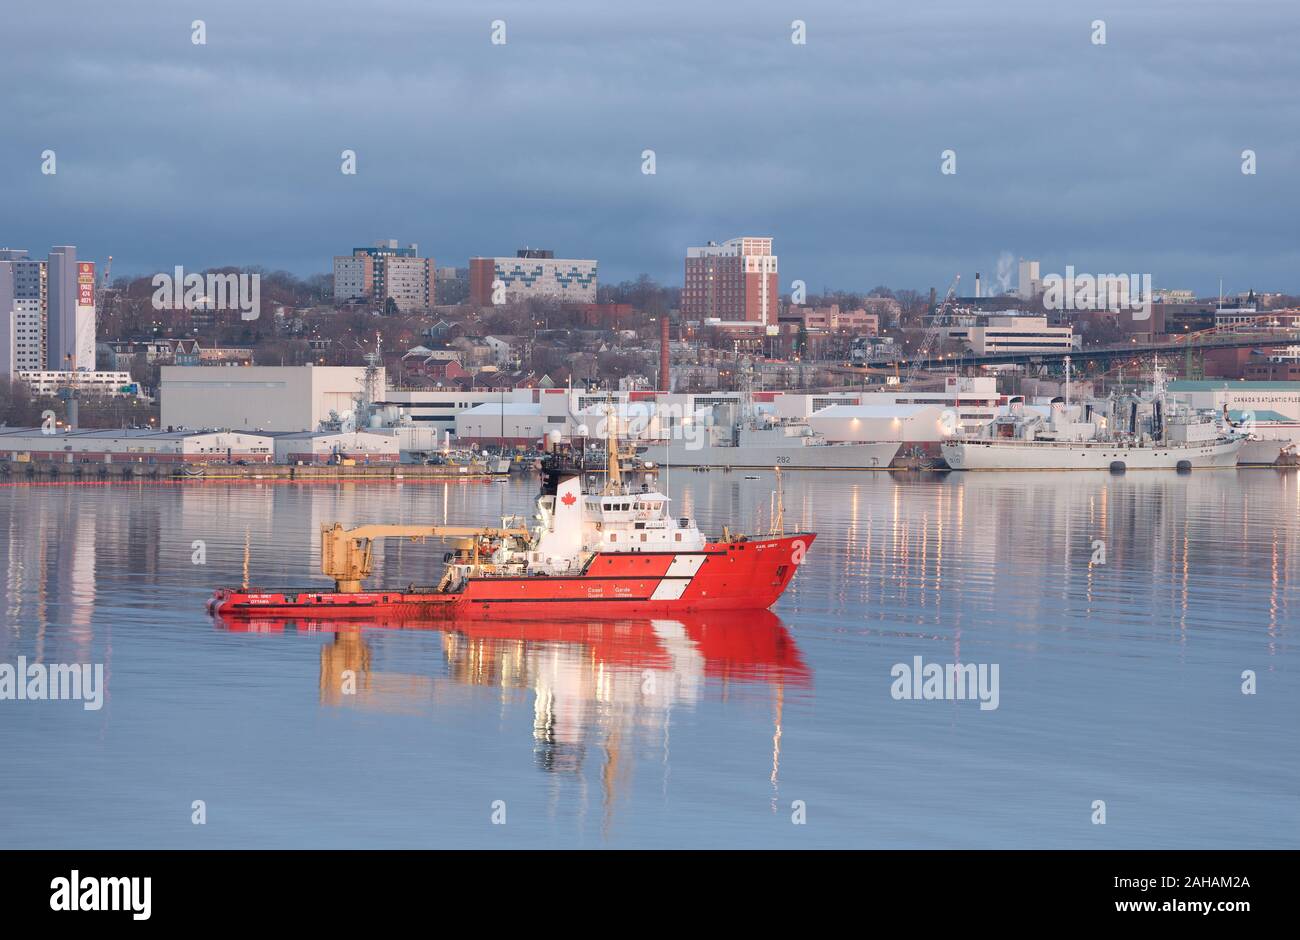 Halifax, Canada - May 09, 2014: CCGS Earl Grey in Halifax Harbour. The Earl Grey is a Canadian Coast Guard light icebreaker and buoy tender ship. Stock Photo